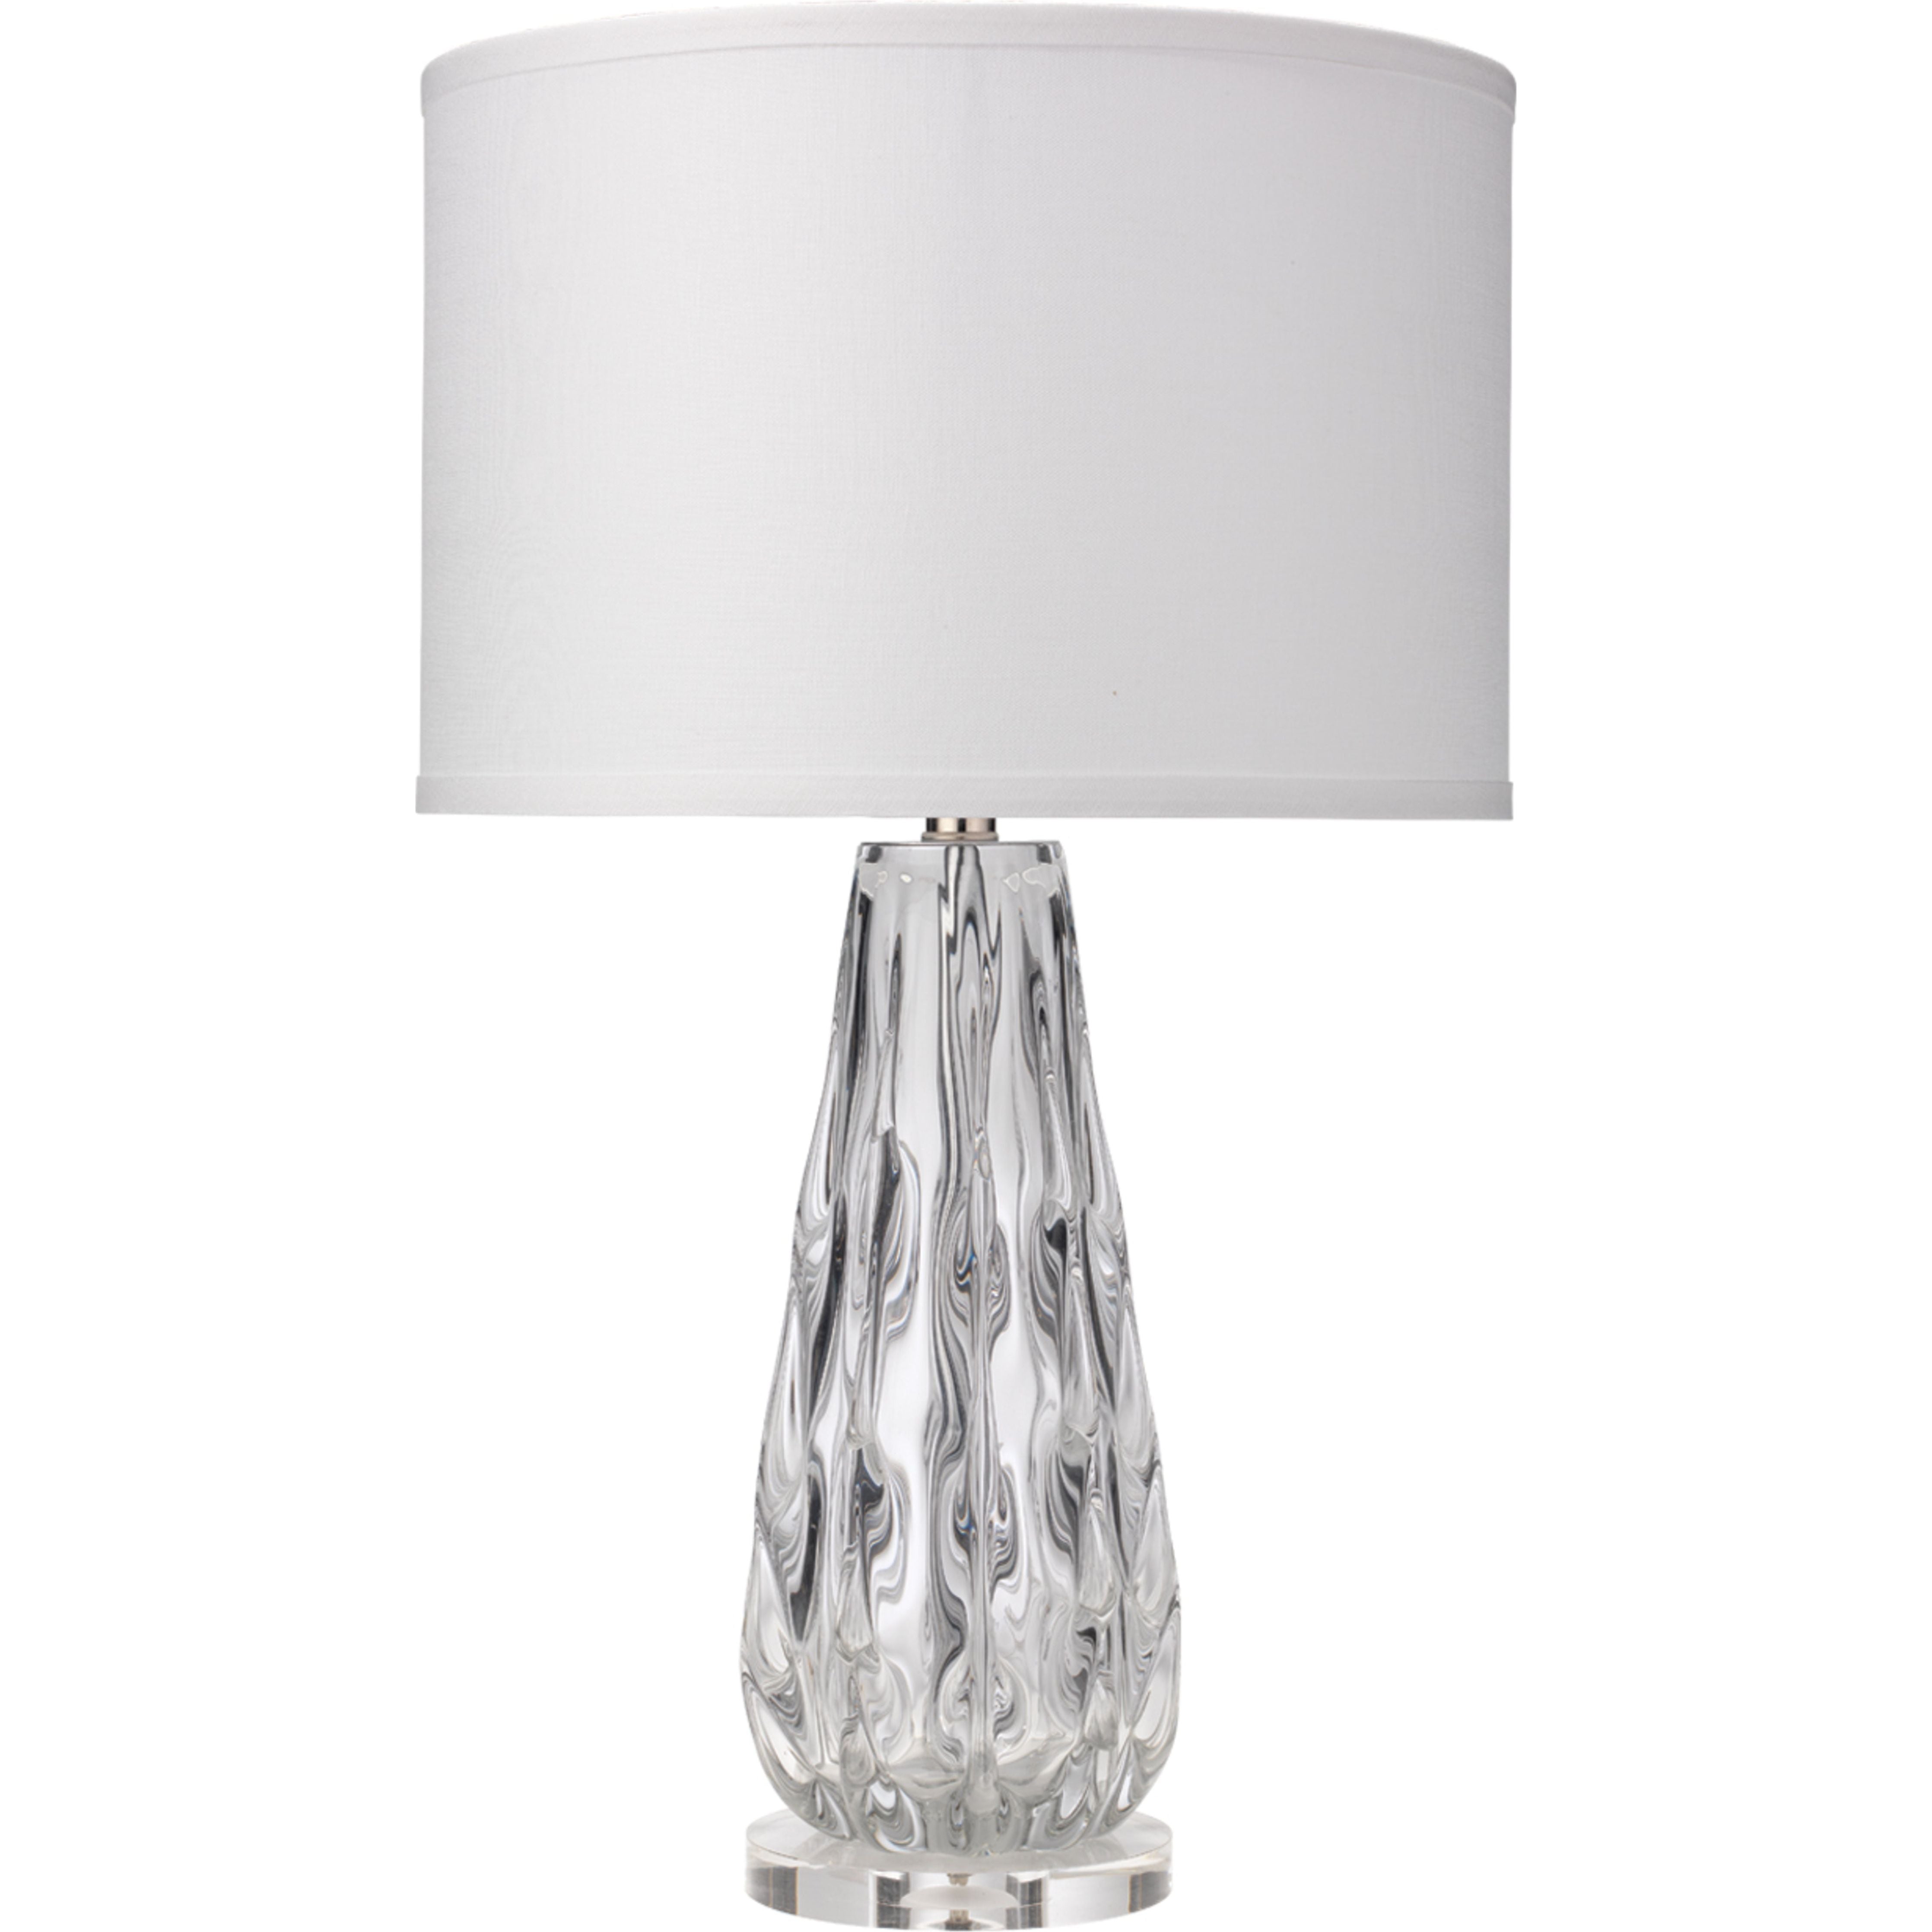 Jamie Young Company - 9LAURCLD131M - Laurel Table Lamp - Laurel - Clear